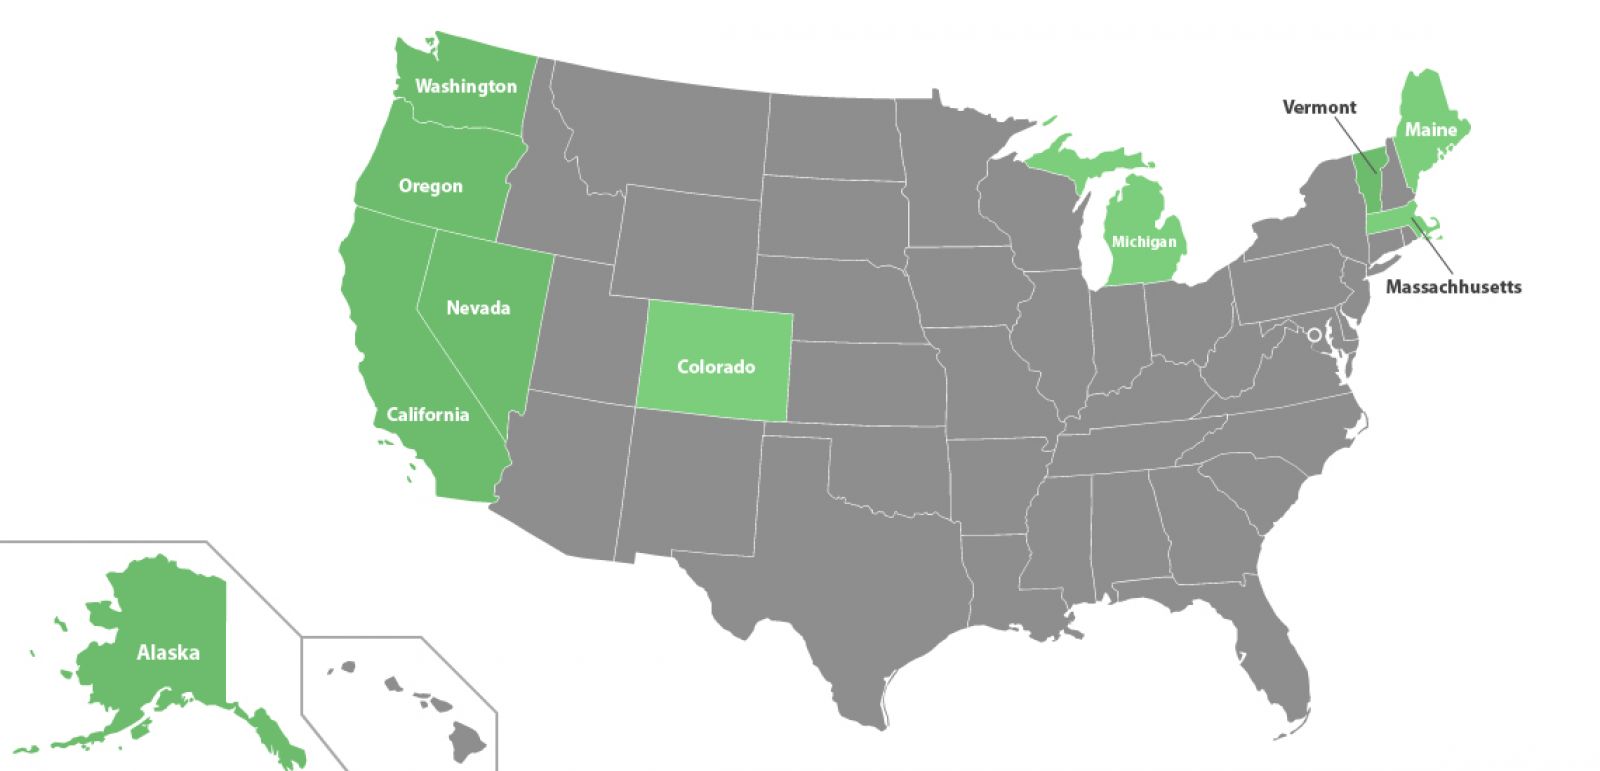 Photo for: In 2019, 4 More US States Might Legalize Recreational Marijuana